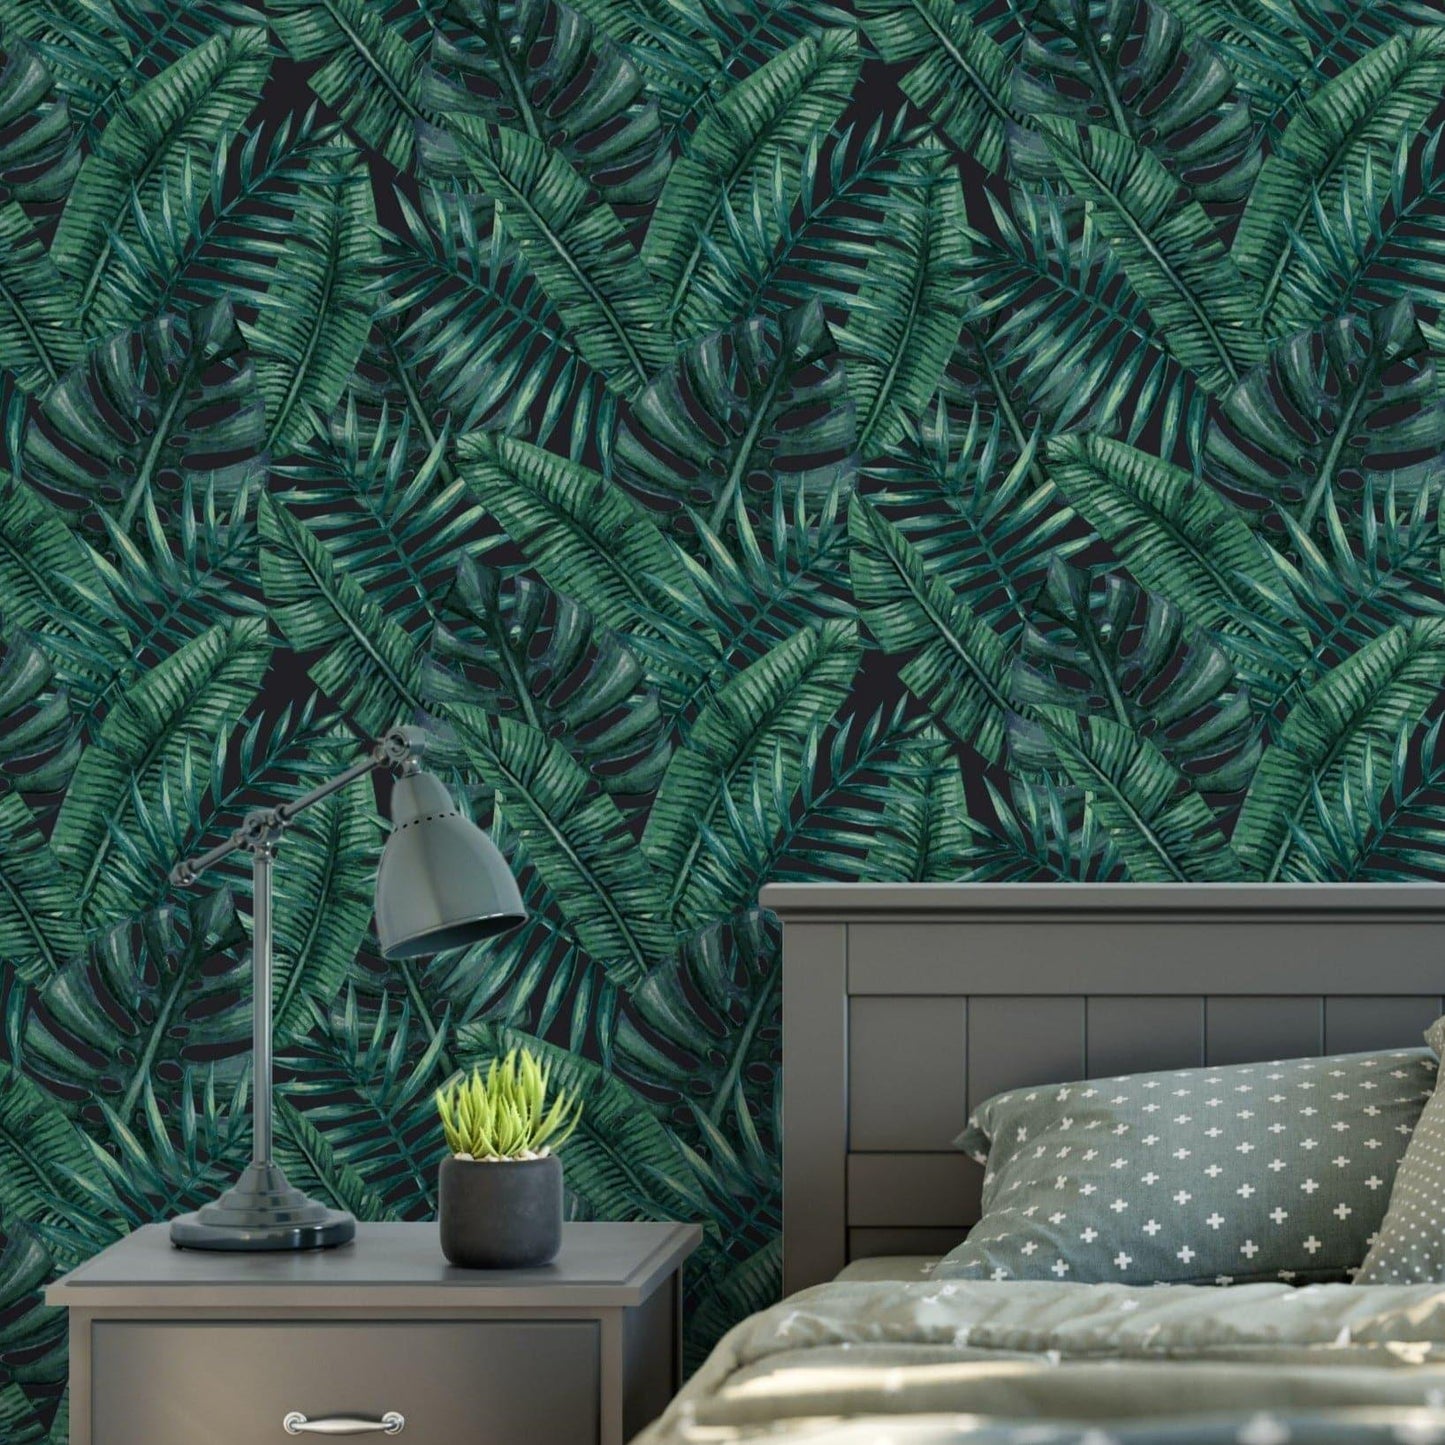 Green Tropical Monstera Leaf Wallpaper Green Tropical Monstera Leaf Wallpaper Tropical Jungle Monstera Palm Leaves Removable Wallpaper 